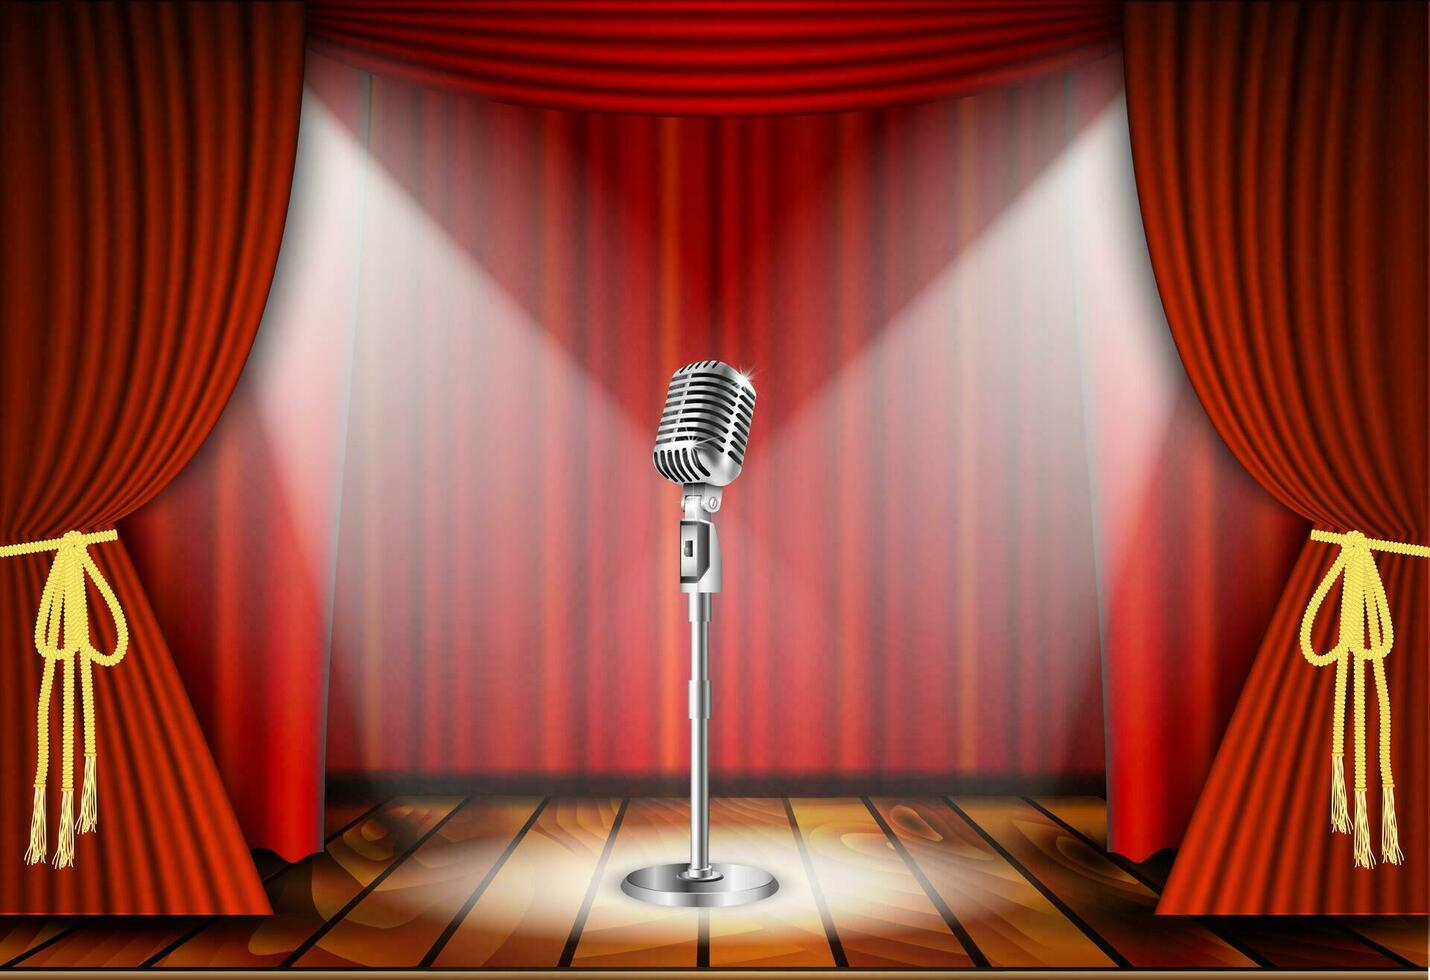 Microphone and red curtain vector